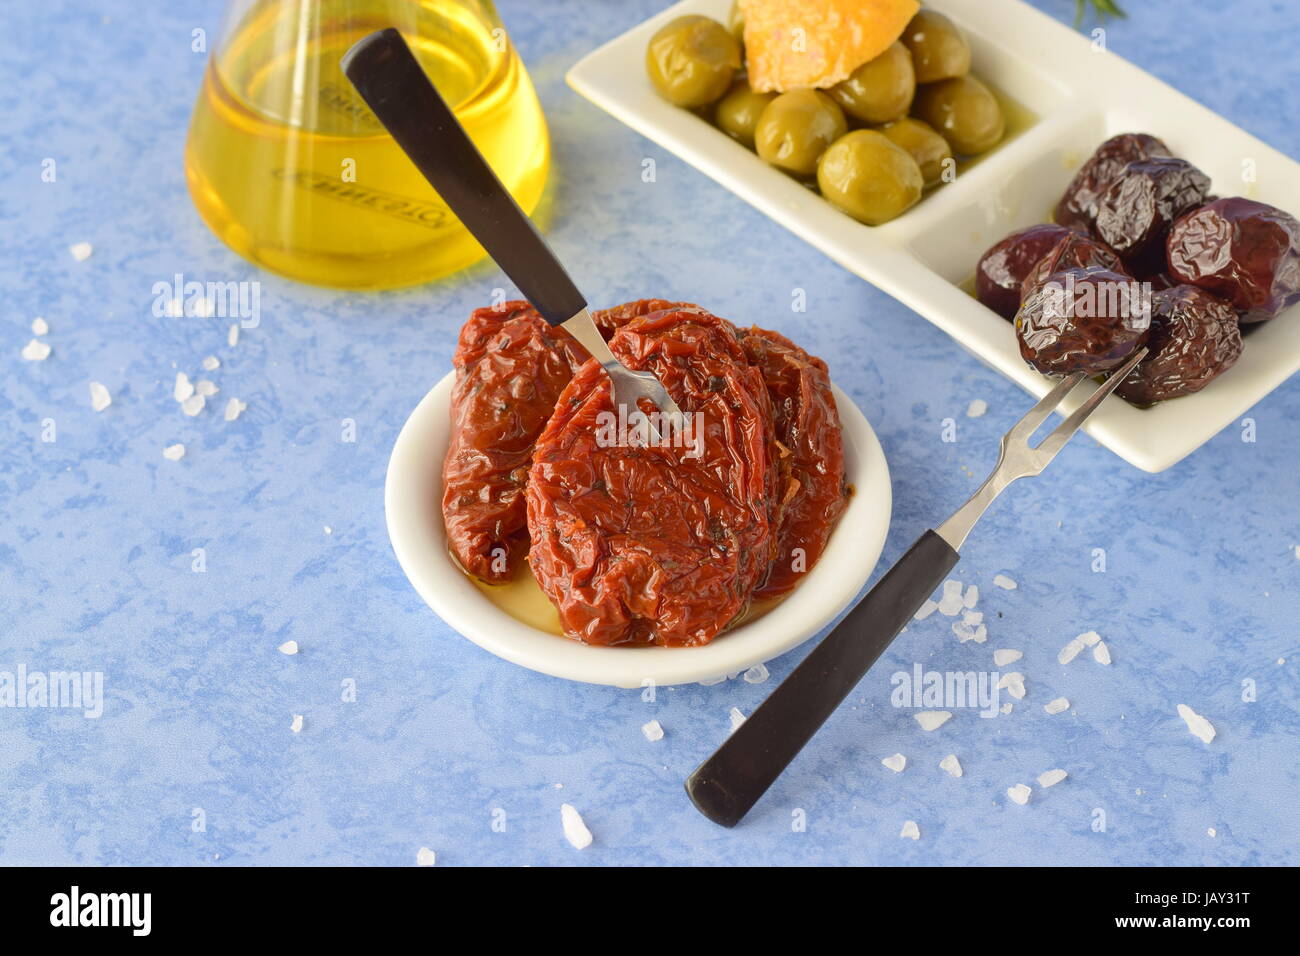 A set of dishes of greek cuisine: olives, sun dried tomatoes, lemon, glass jar with olive oil. Traditional Greek food. Mediterranean lifestyle Stock Photo